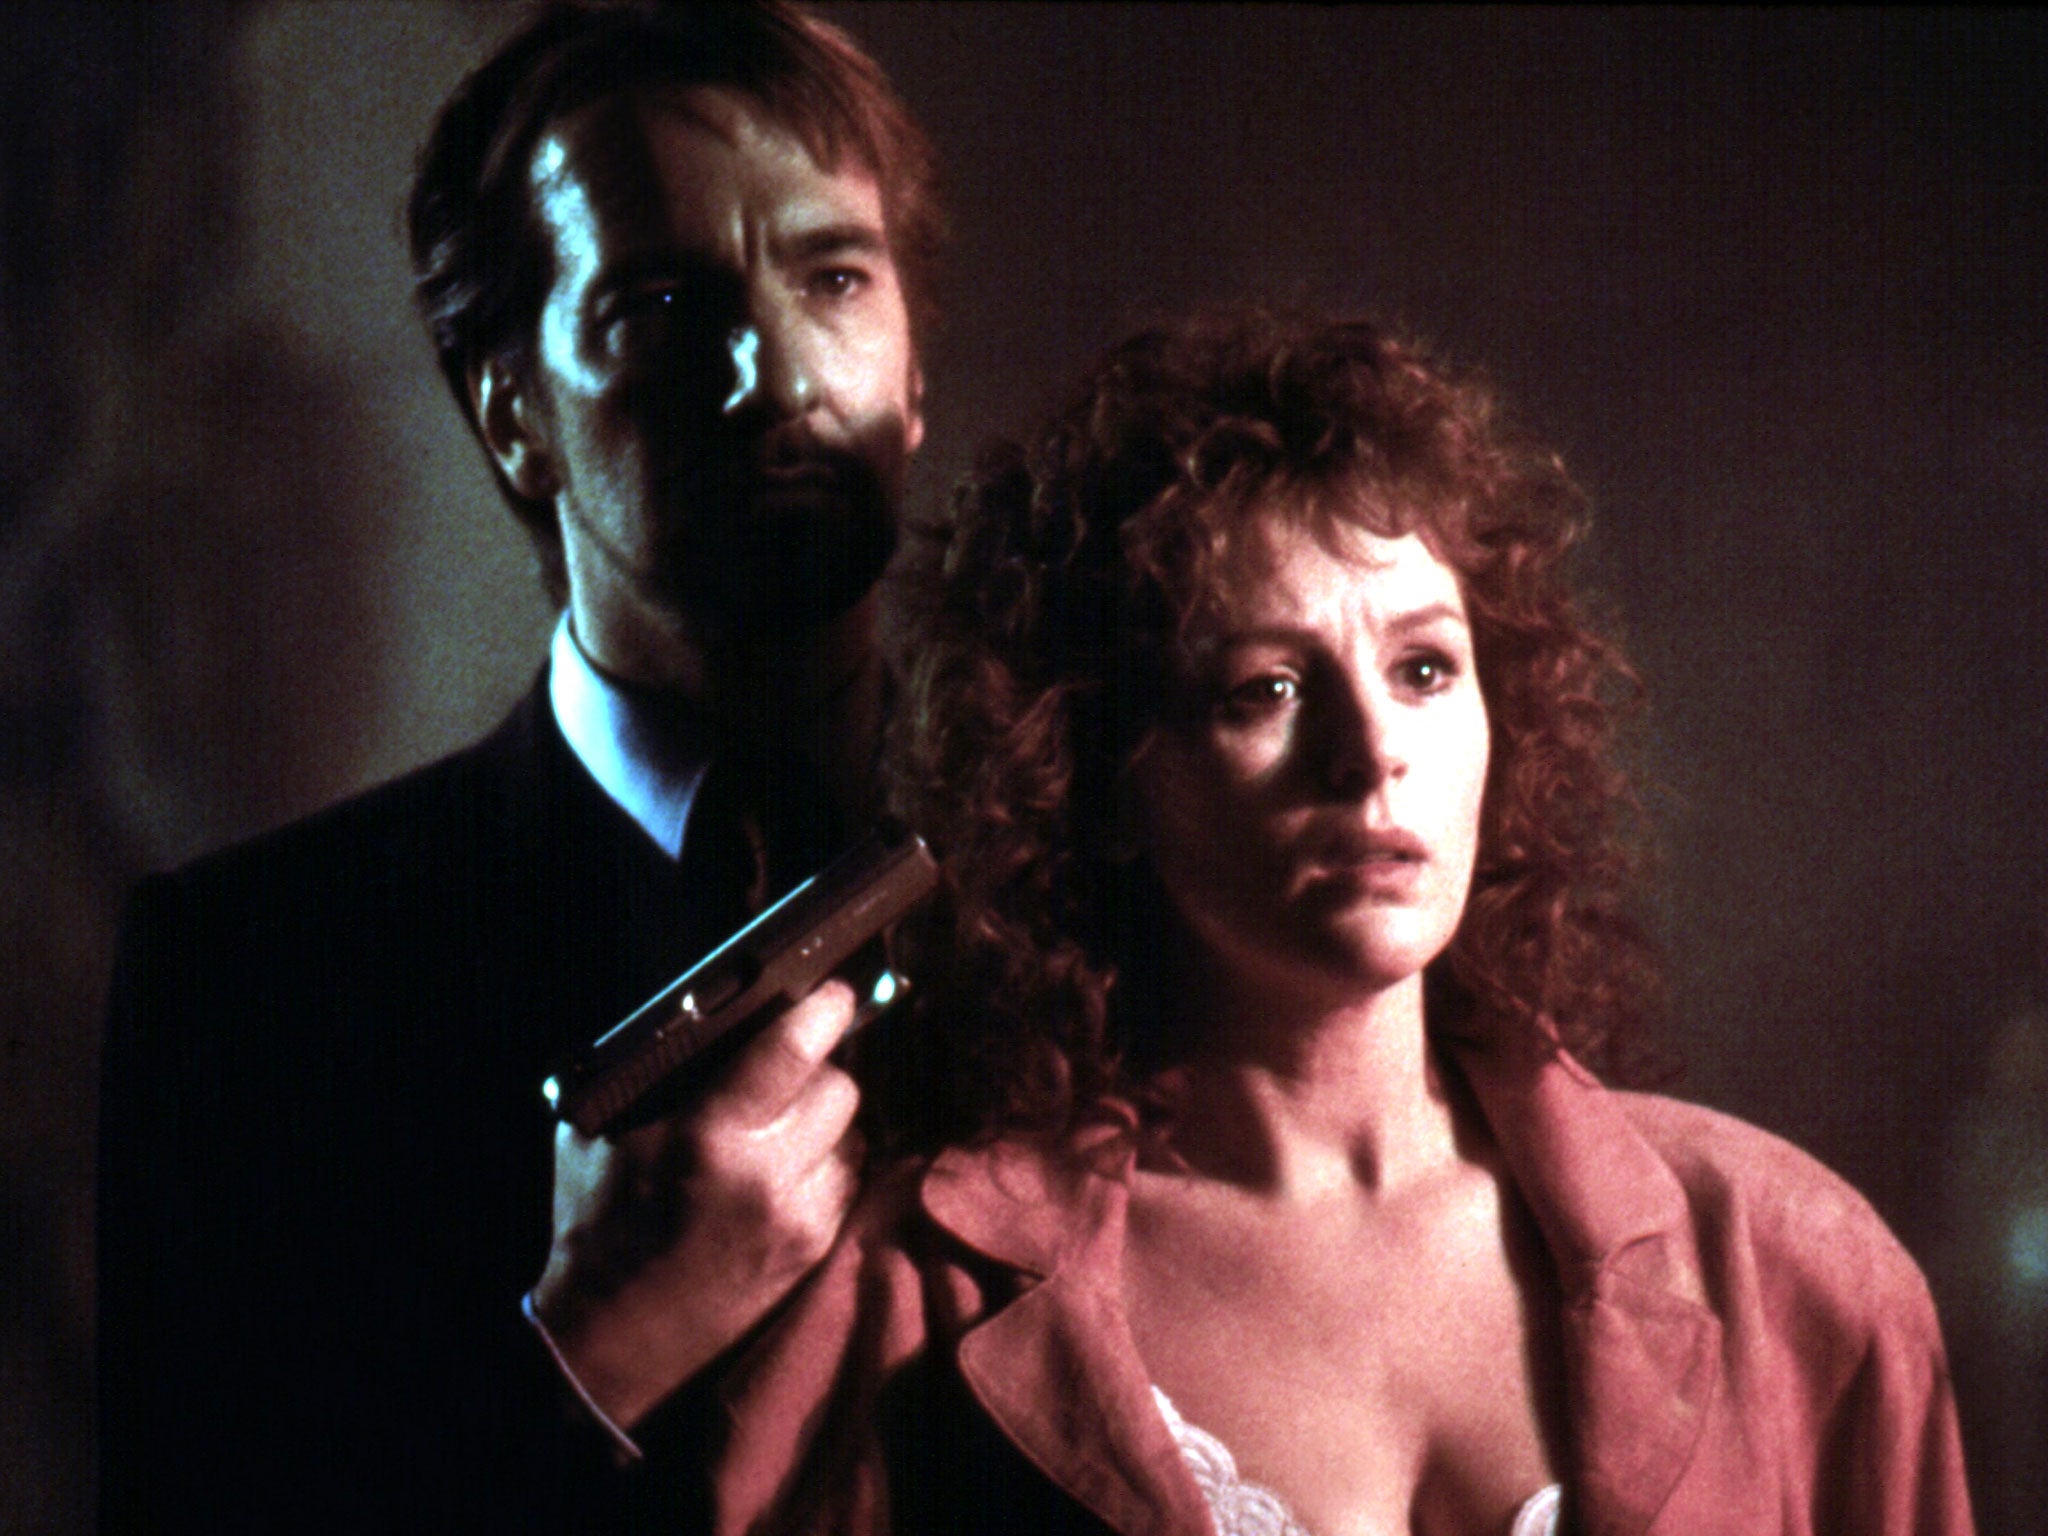 Alan Rickman plays the sneering villain, seen here in a scene with Bonnie Bedelia (Rex)